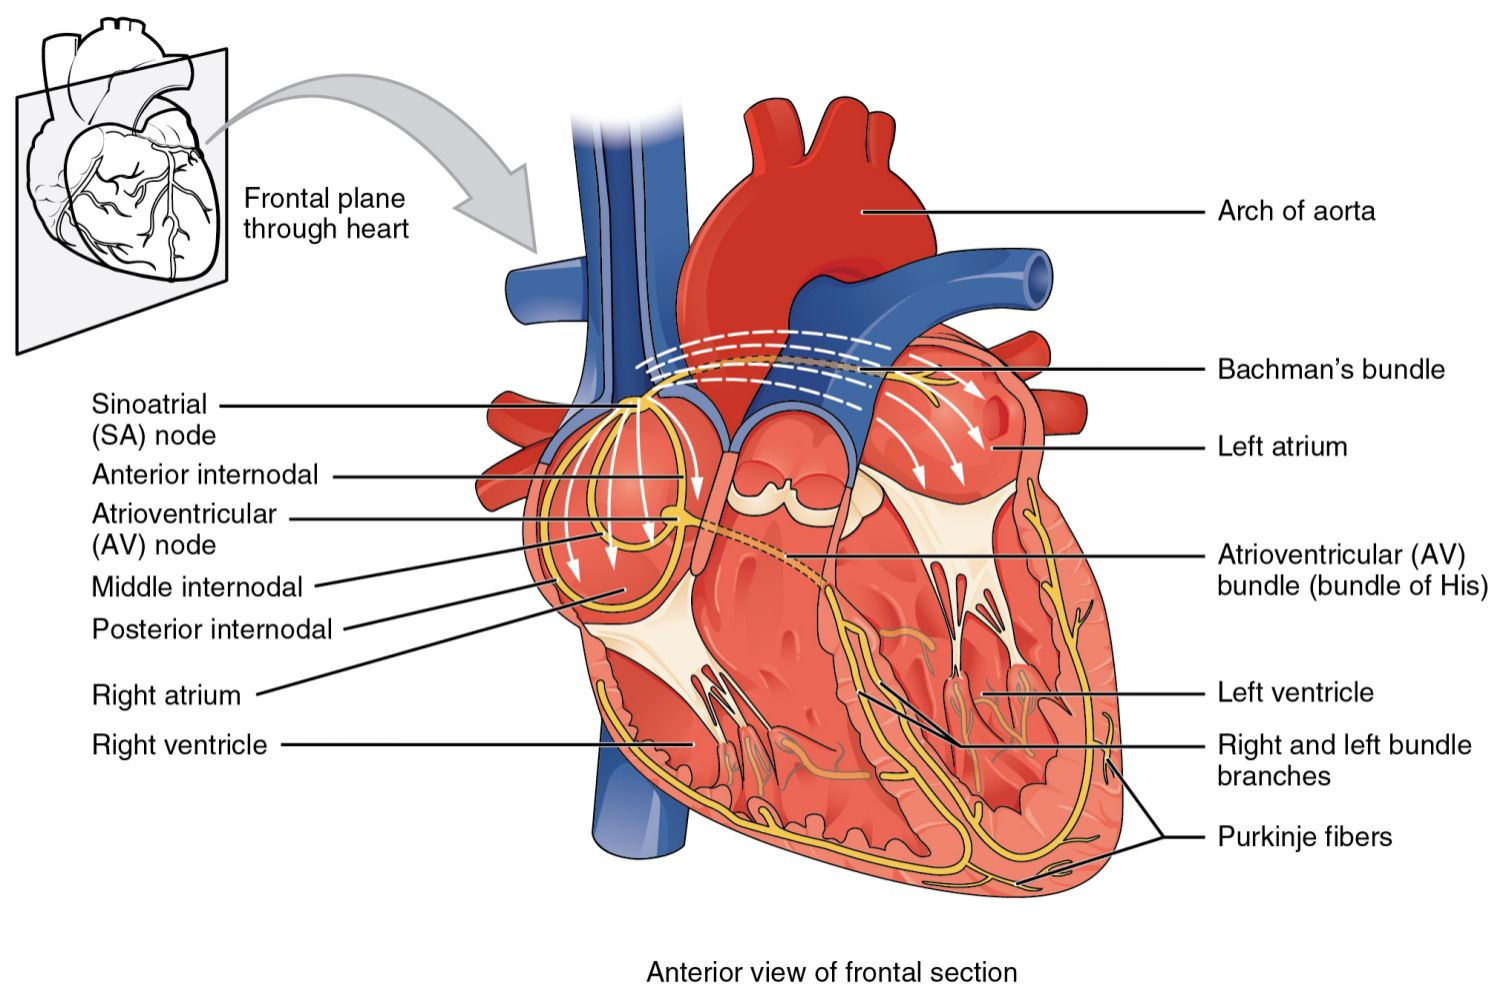 Diagram Of The Heart Overview Of Sinoatrial And Atrioventricular Heart Nodes